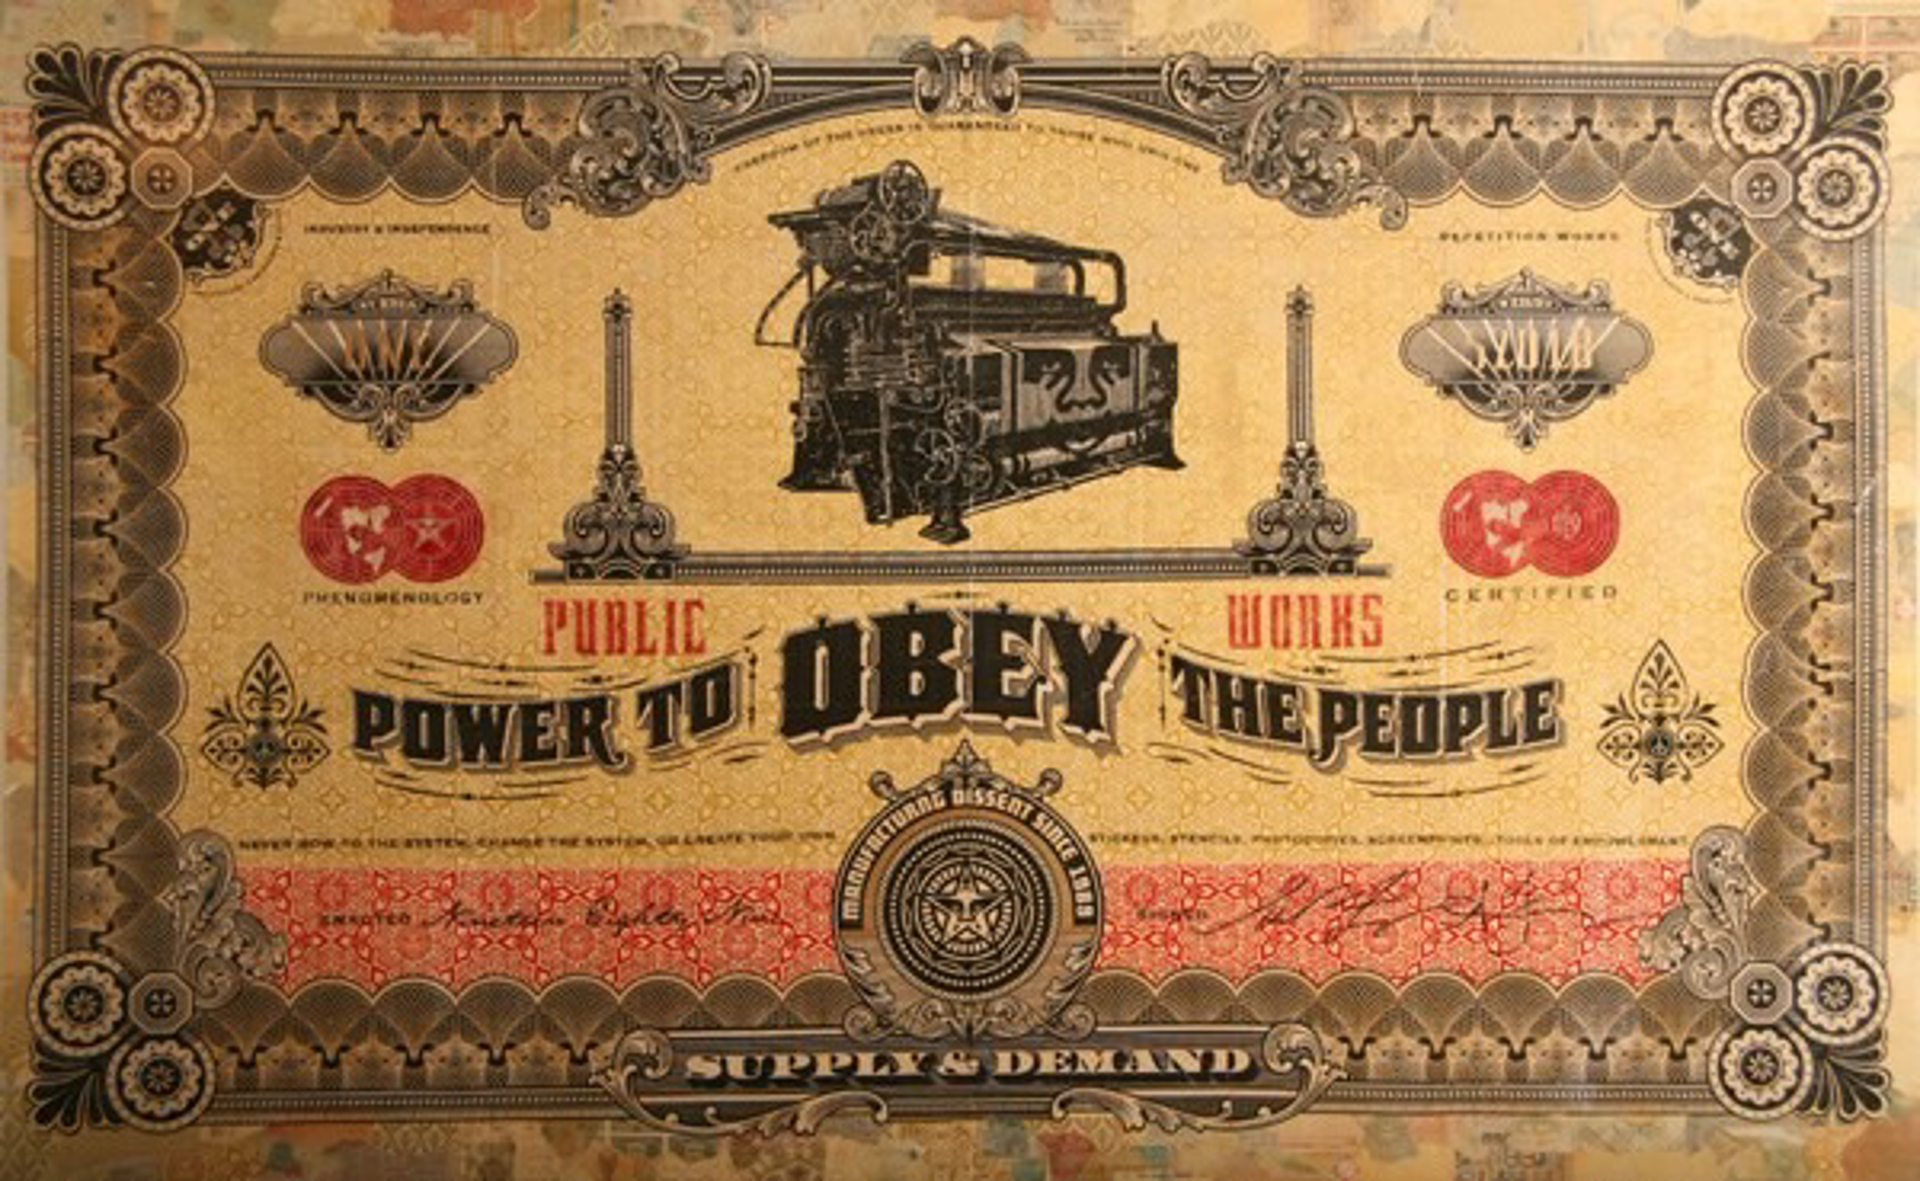 TWO SIDES OF CAPITALISM (GOOD) by Shepard Fairey